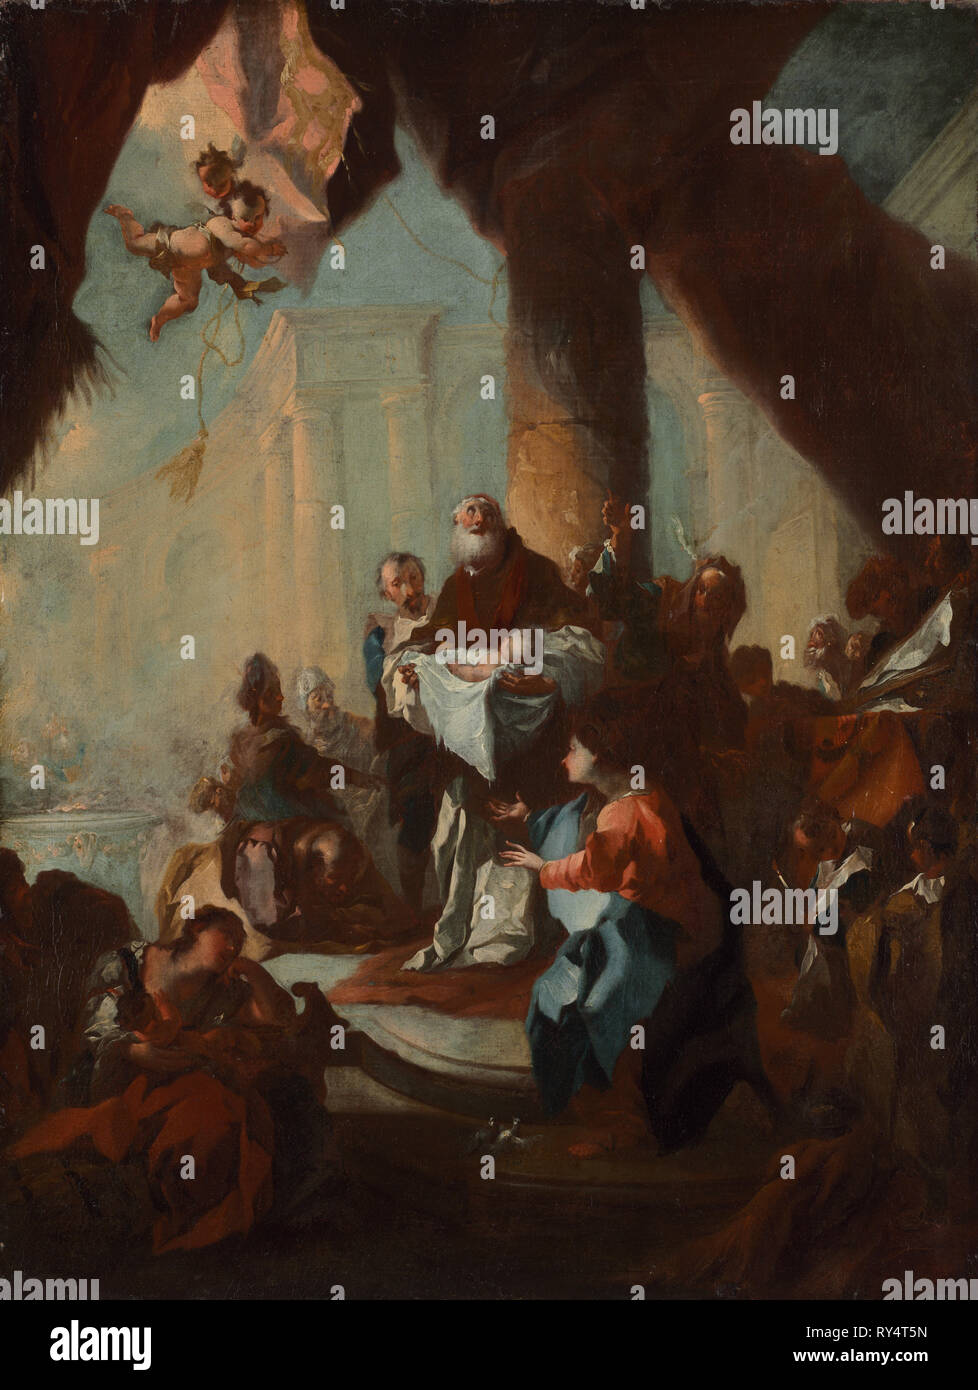 Study for 'The Presentation of Christ in the Temple' (for Saint Ulrich, Vienna), c. 1750. Attributed to Franz Anton Maulbertsch (Austrian, 1724-1796). Oil on canvas; framed: 90 x 70 x 9 cm (35 7/16 x 27 9/16 x 3 9/16 in.); unframed: 69.5 x 52.3 cm (27 3/8 x 20 9/16 in Stock Photo